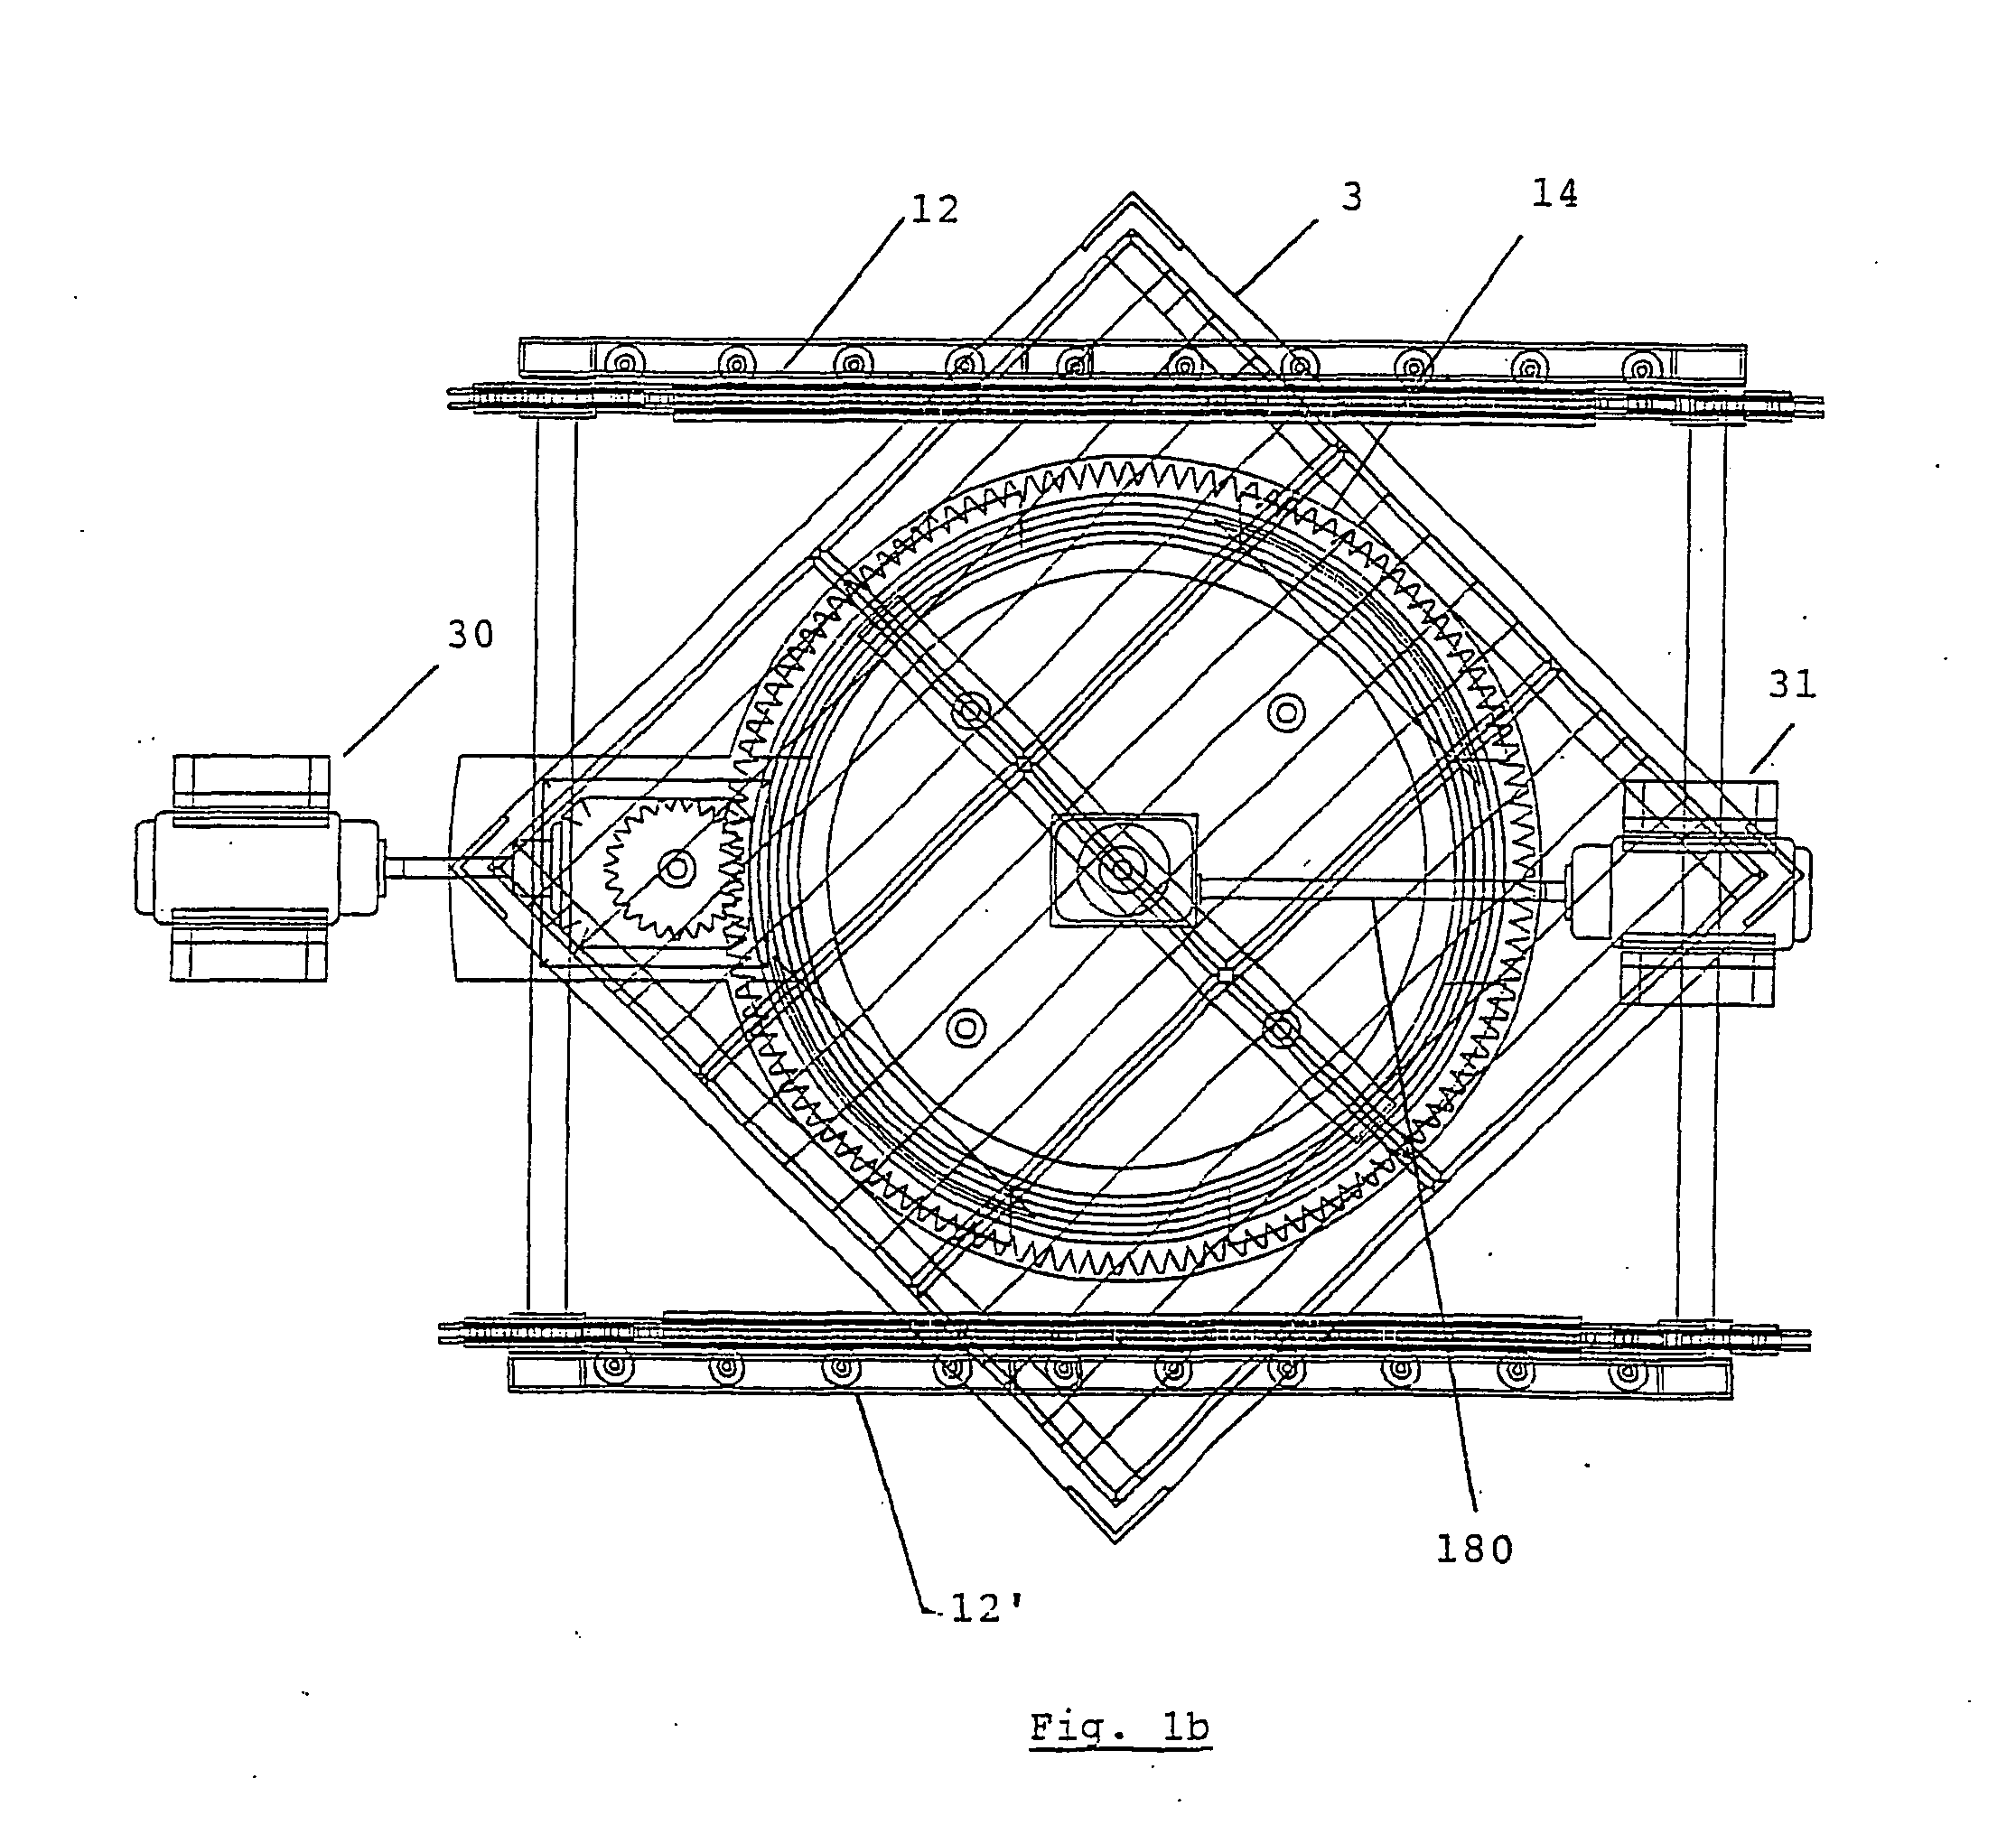 Process and apparatus for irradiating product pallets